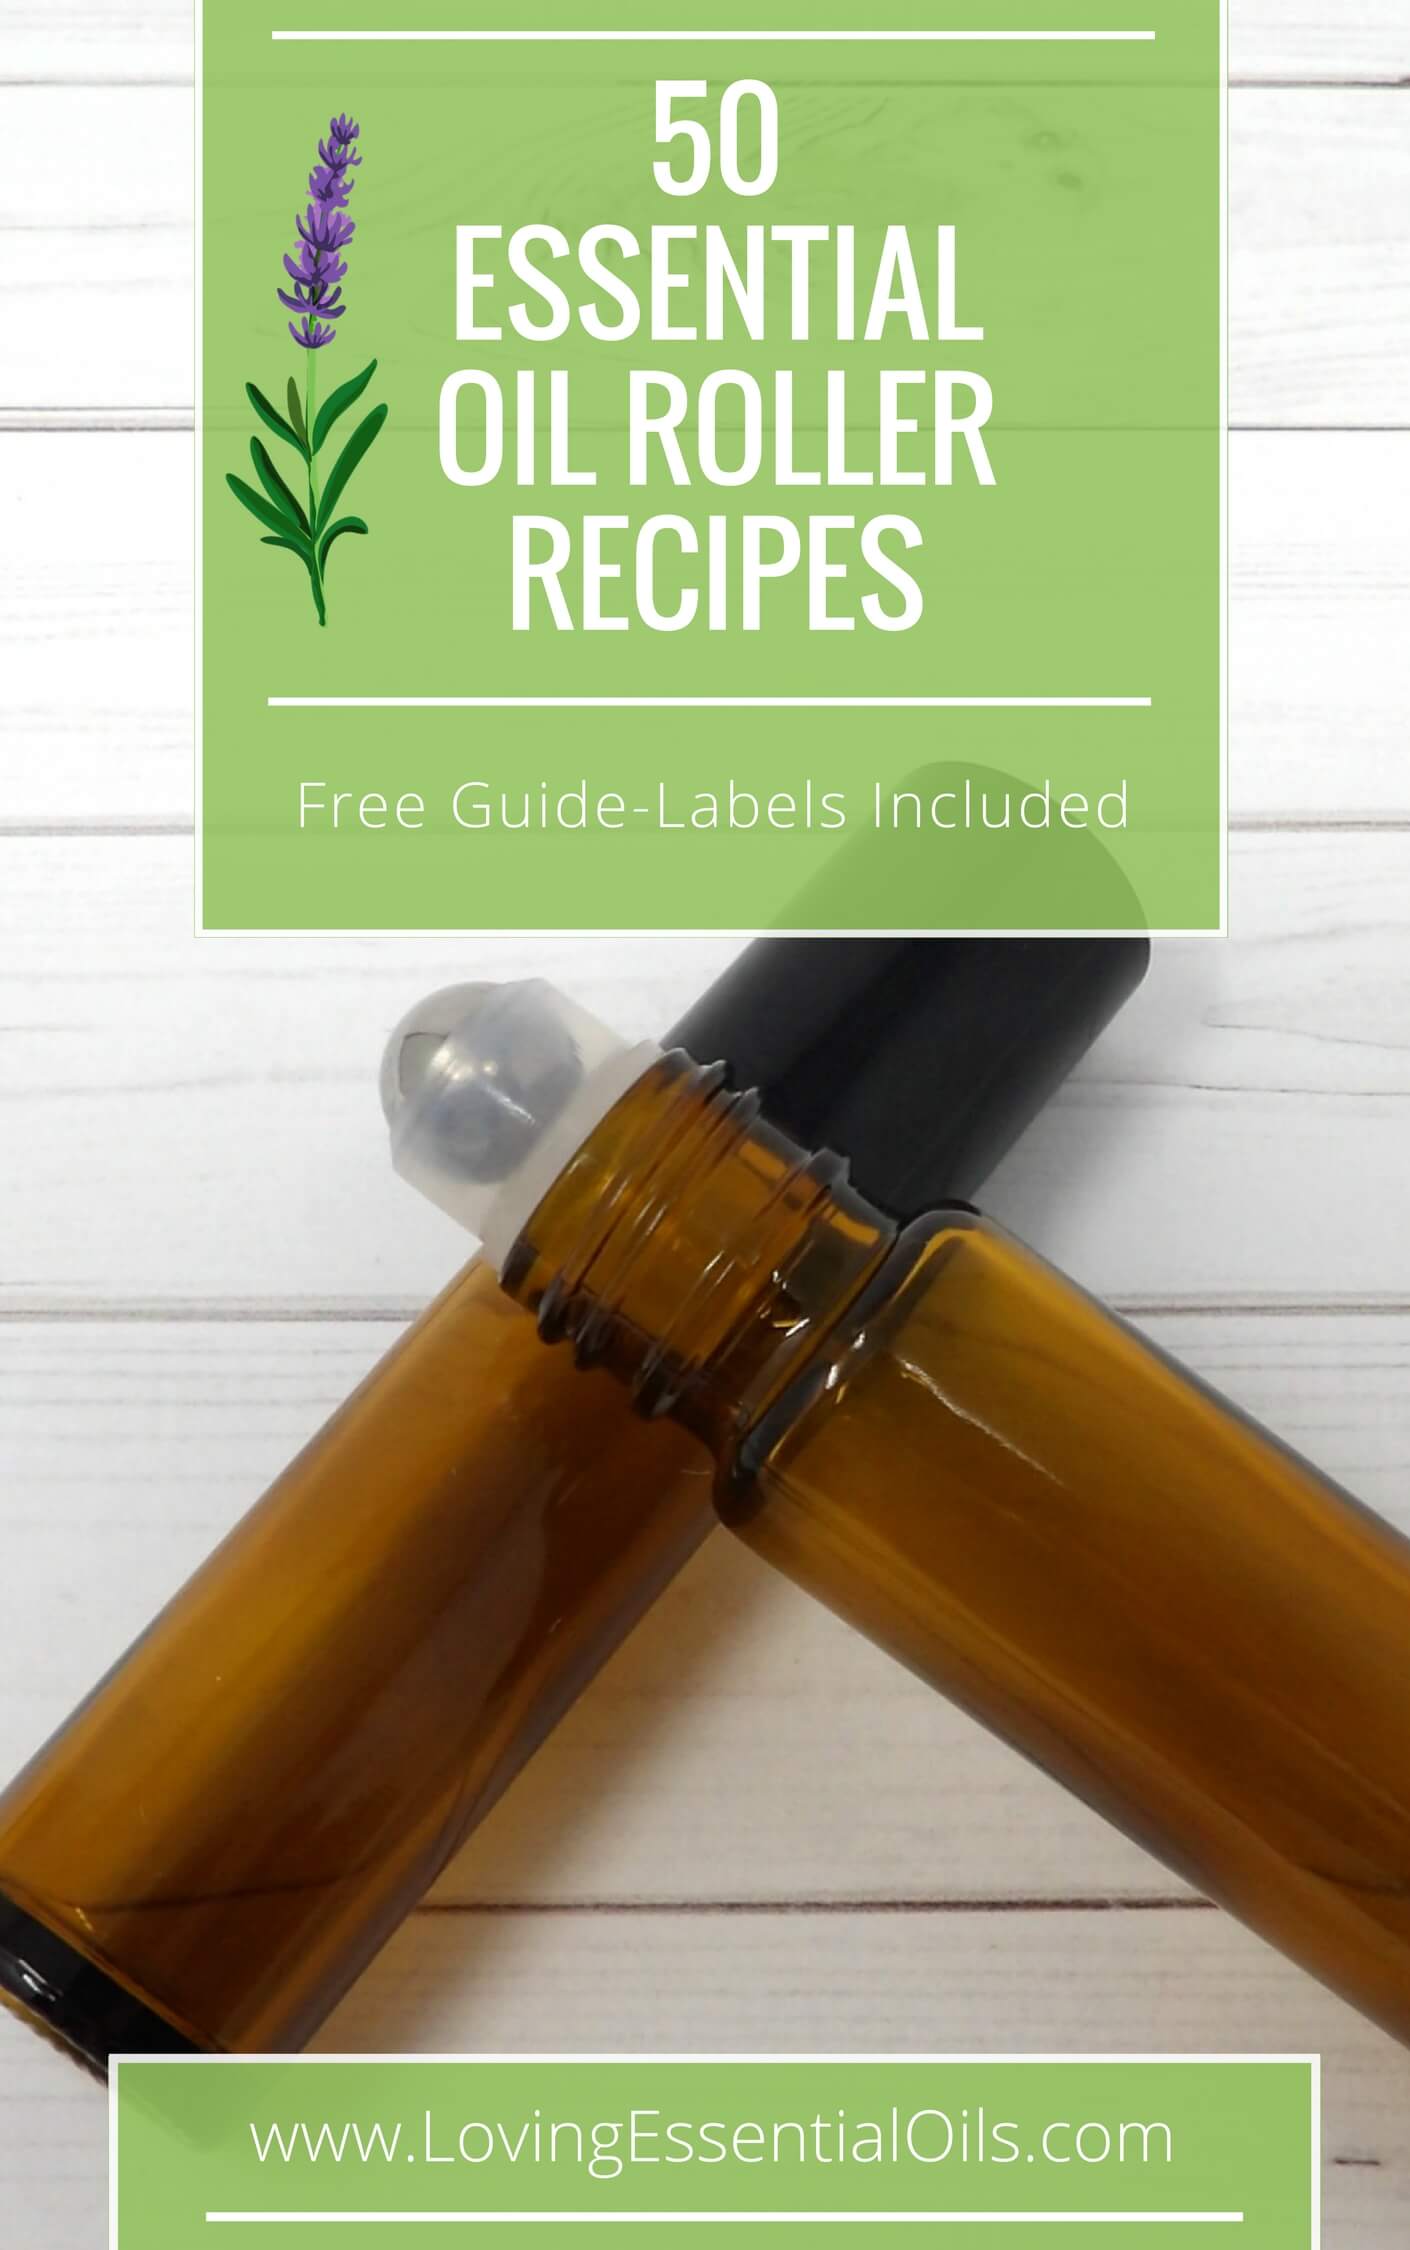 Essential Oil Roll On Recipes - 50 Free DIY Roller Recipe Guide by Loving Essential Oils